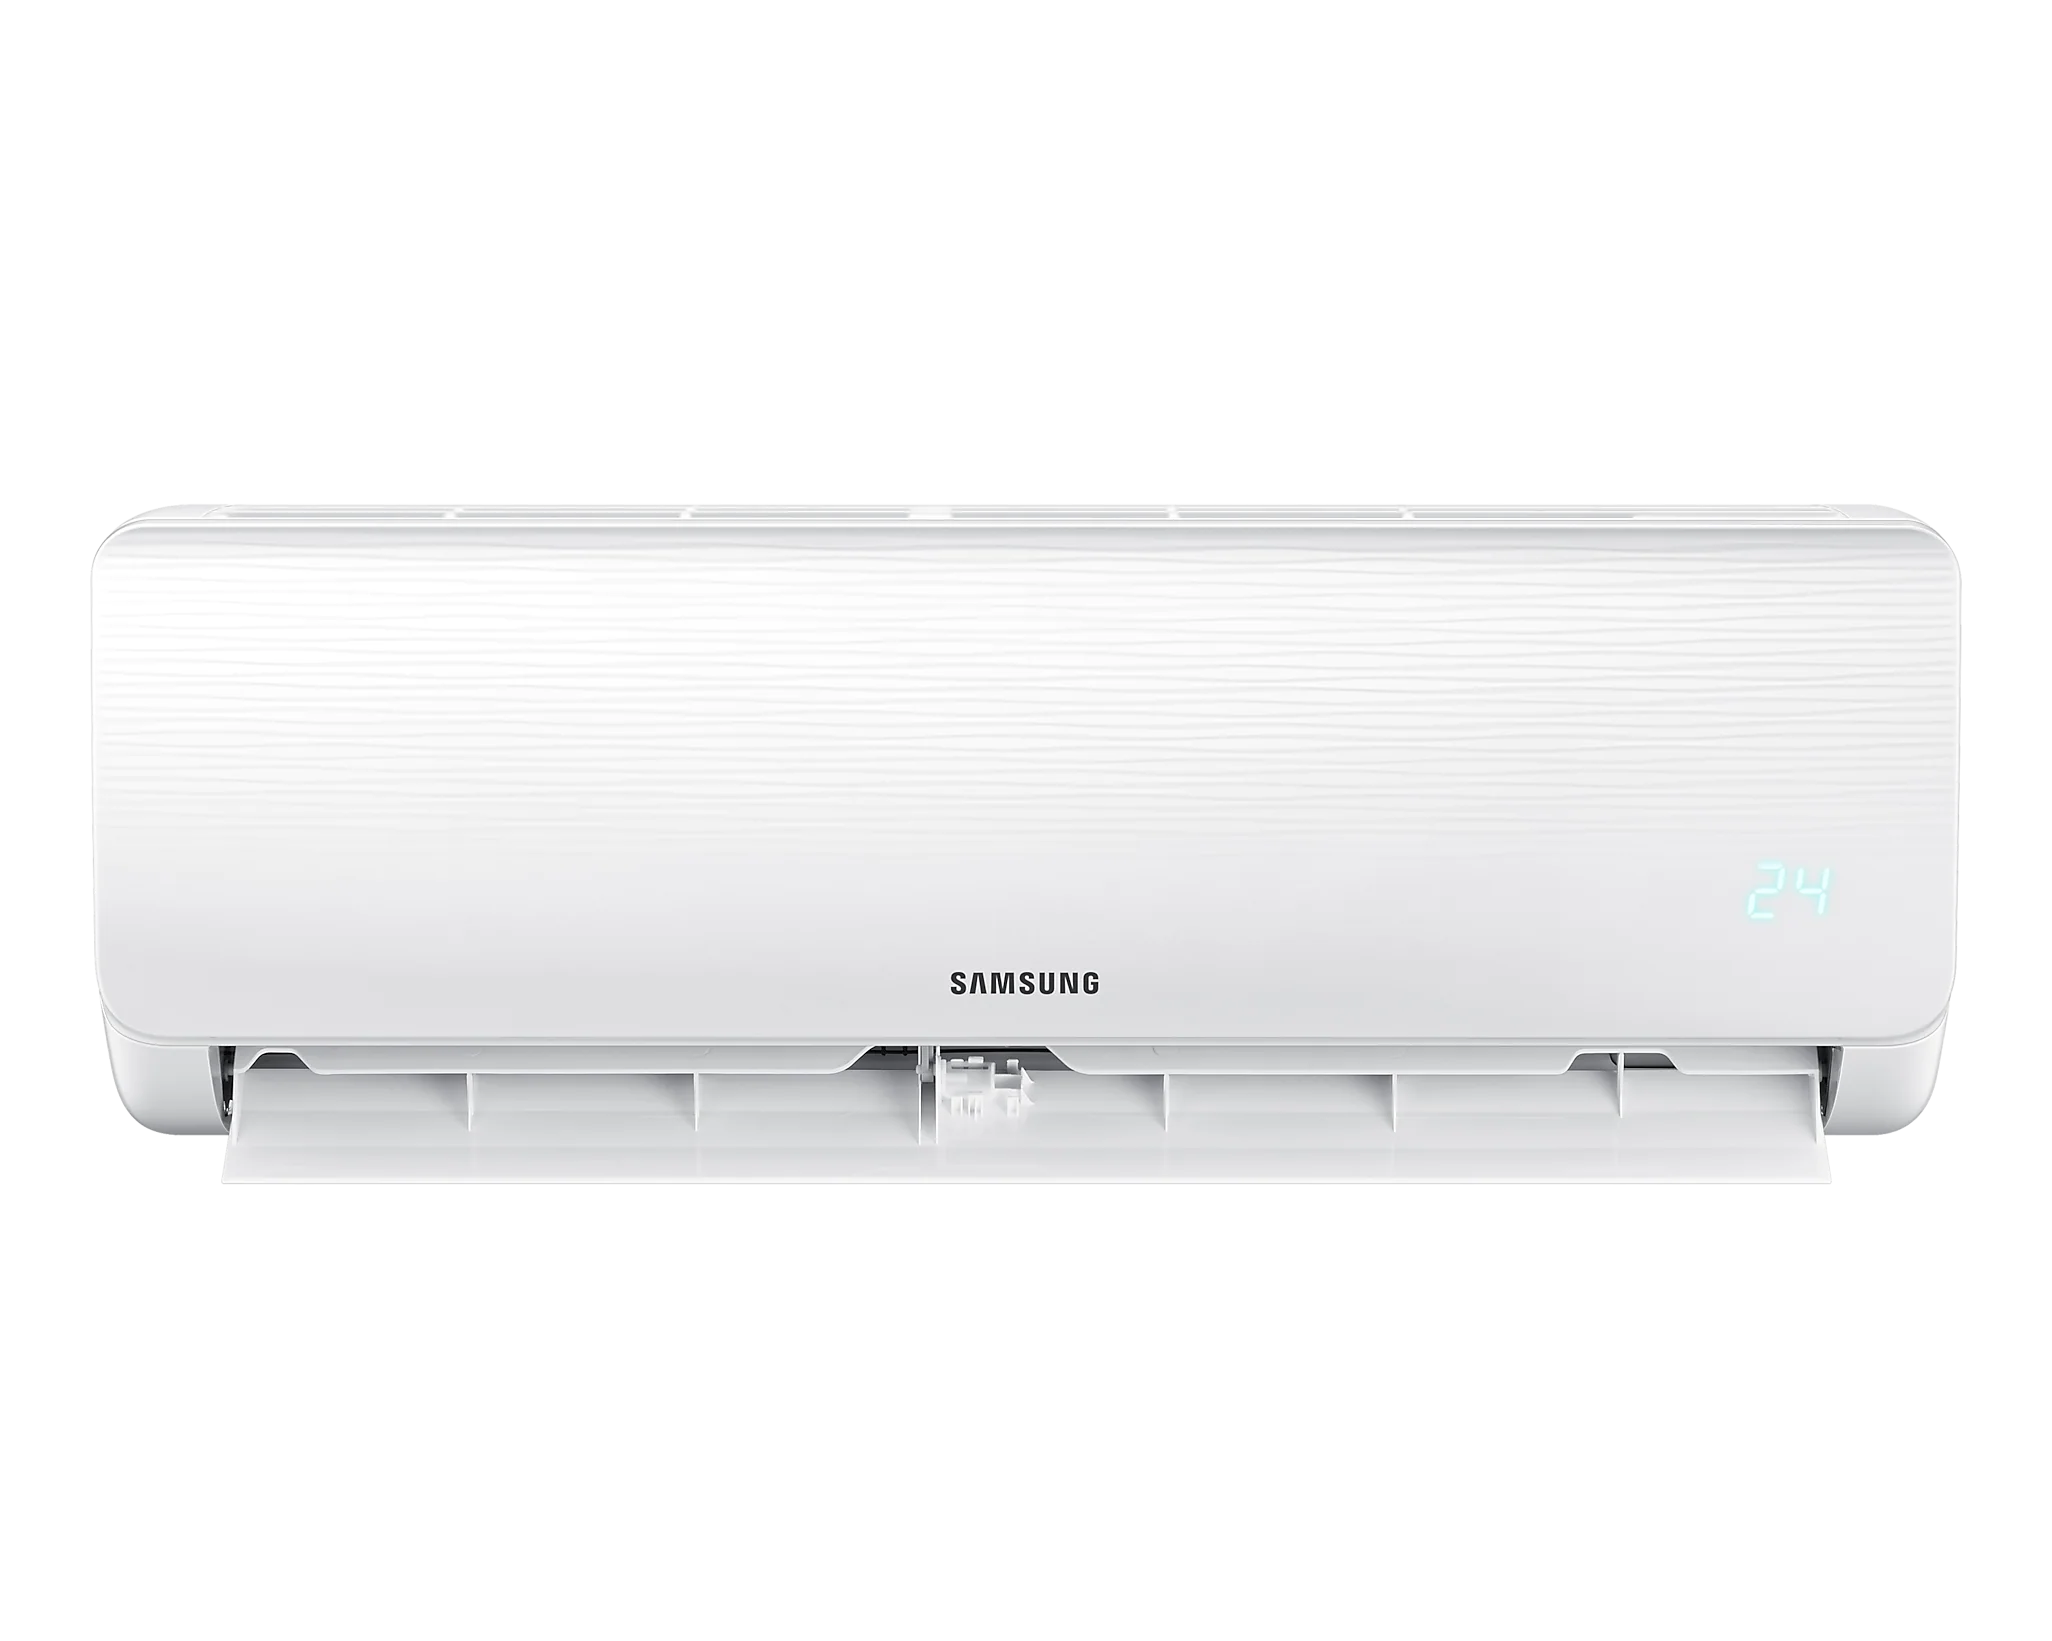 Samsung Wall-Mount AC with Fast Cooling